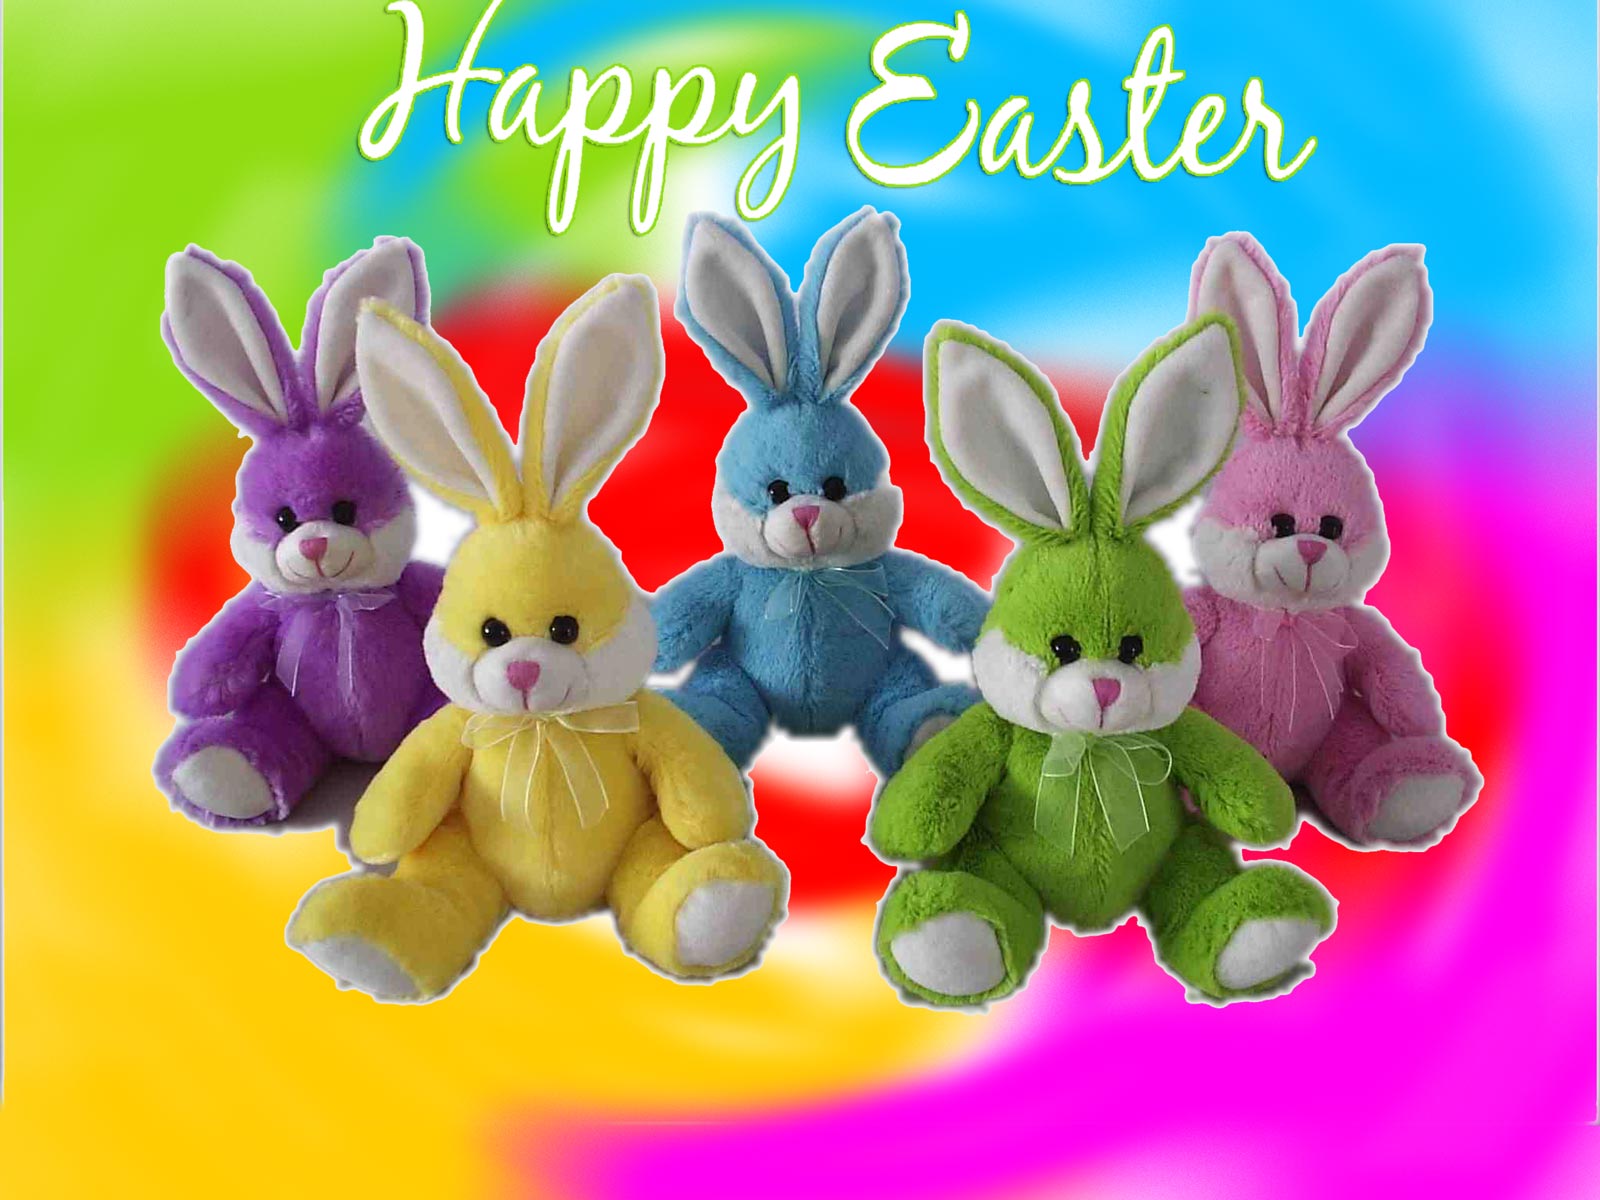 happy easter wallpaper,easter,stuffed toy,easter bunny,rabbits and hares,animal figure